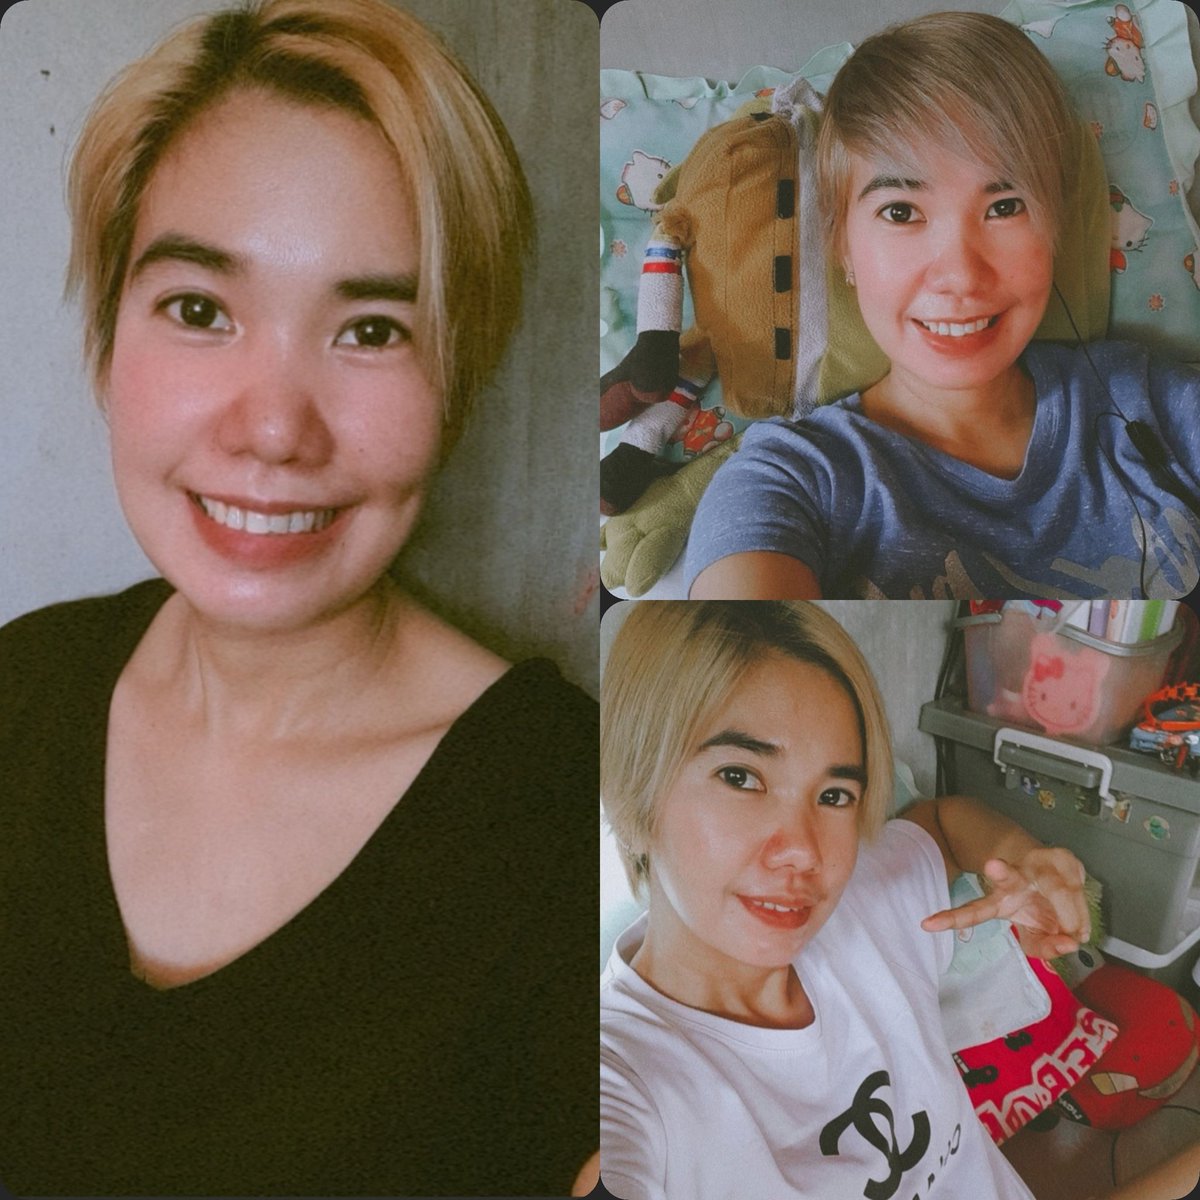 KEEPIN IT SIMPLE💜
I had short hair for a while but ended up loving it. The beauty of having a short hair is that I actually can wash and style it any way I want.😊
#shorthair #messyhairdontcare #nohassle #washandwear #itsoktobedifferent #styling #forachange